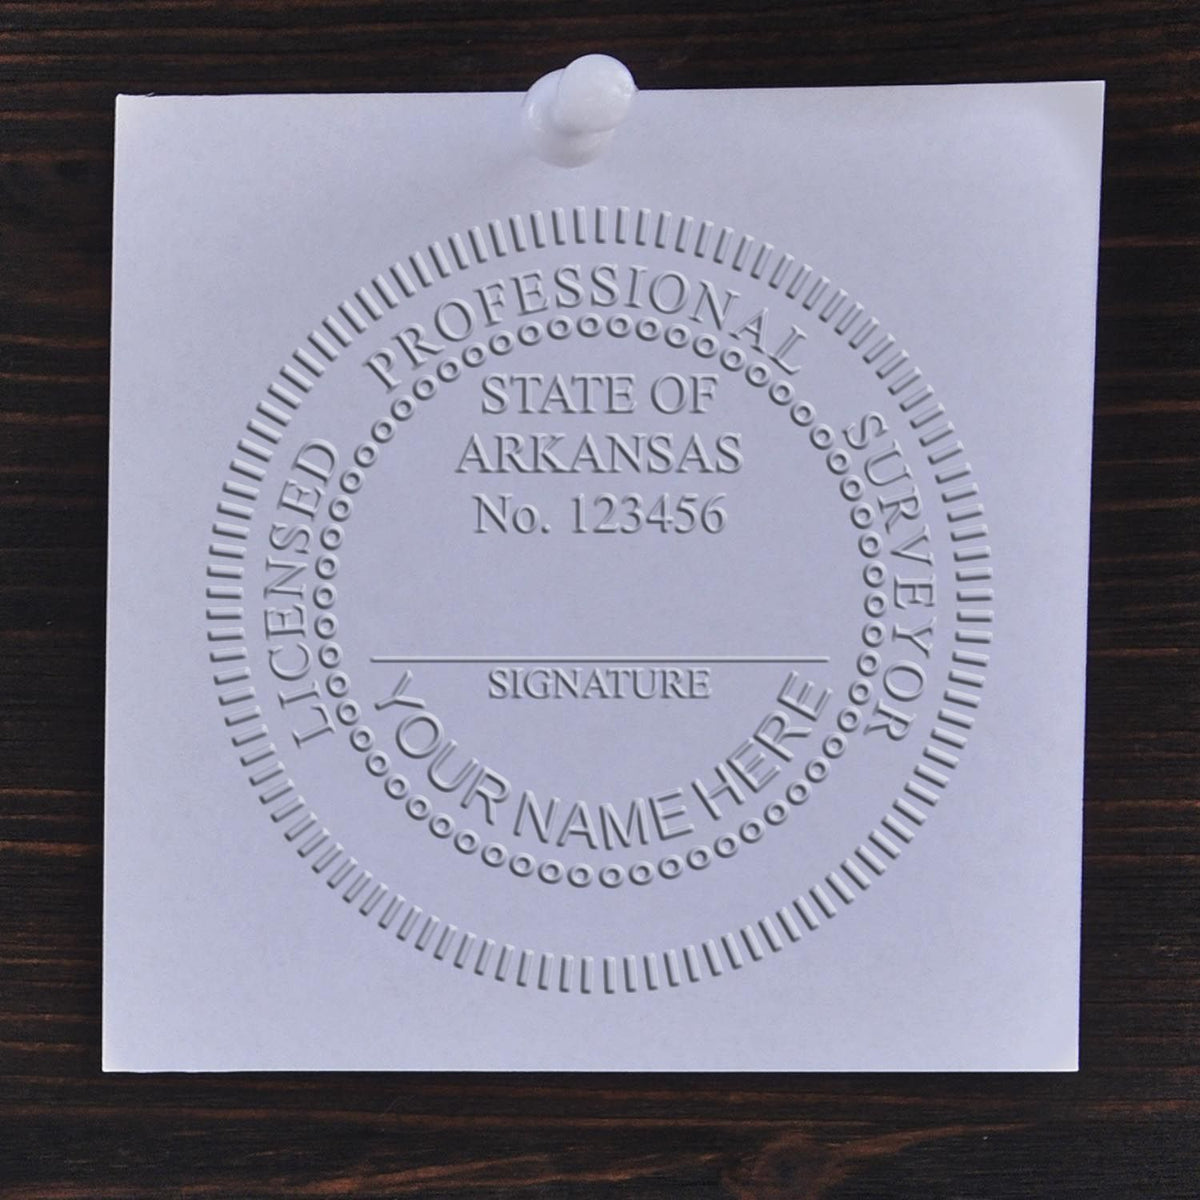 A stamped impression of the Arkansas Desk Surveyor Seal Embosser in this stylish lifestyle photo, setting the tone for a unique and personalized product.